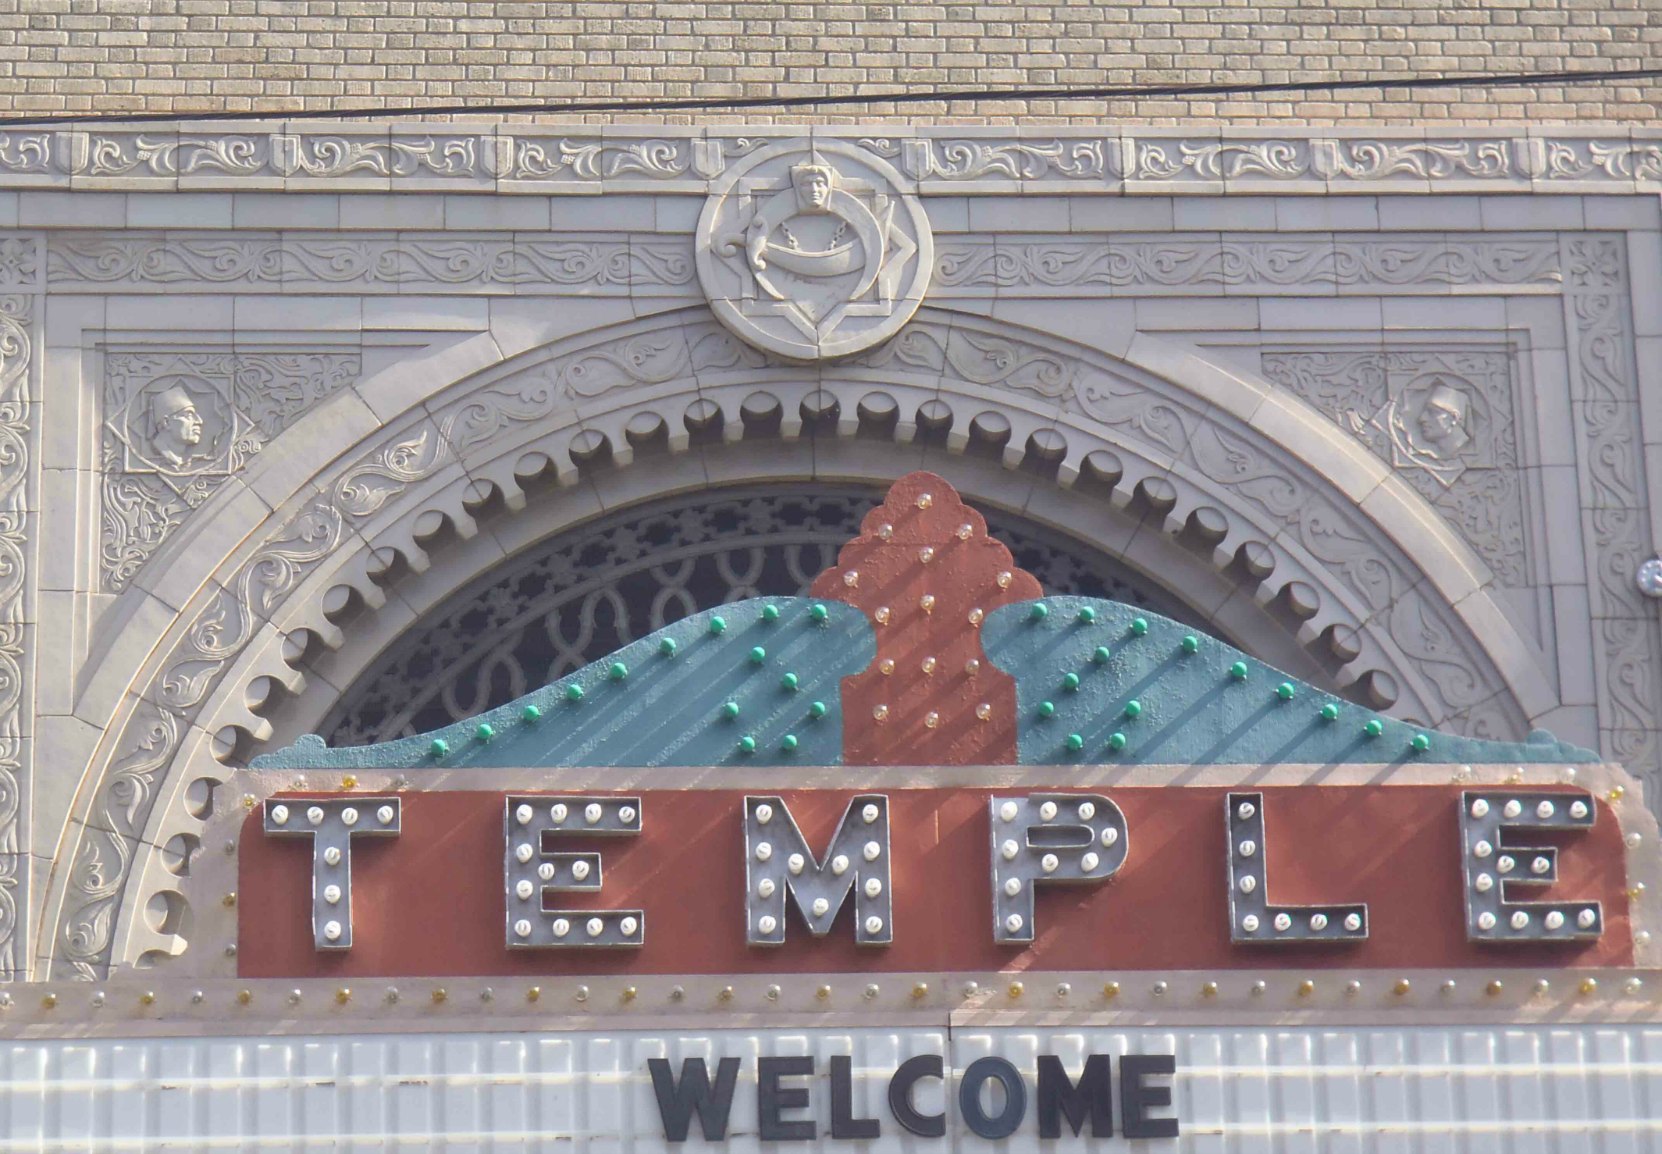 Architectural detail at the entrance to the Temple Theater, Meridian, Mississippi. Note the Shriners emblem at the top of the arch.